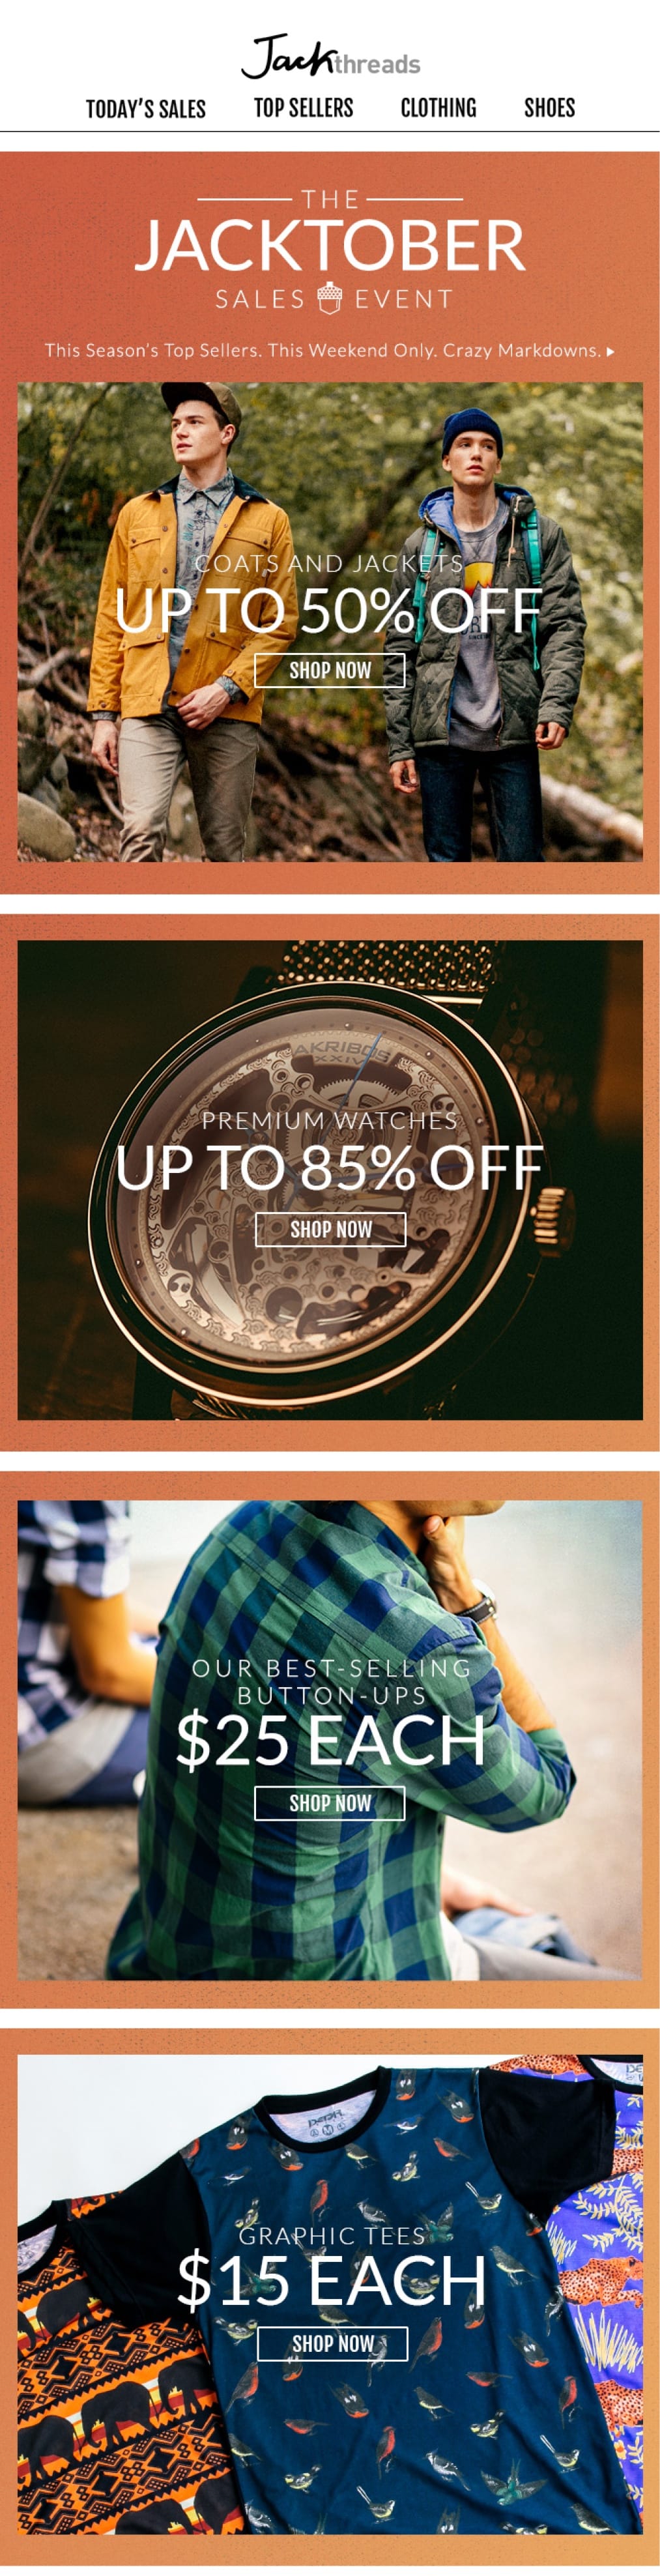 promotional email example jackthreads (sale email)